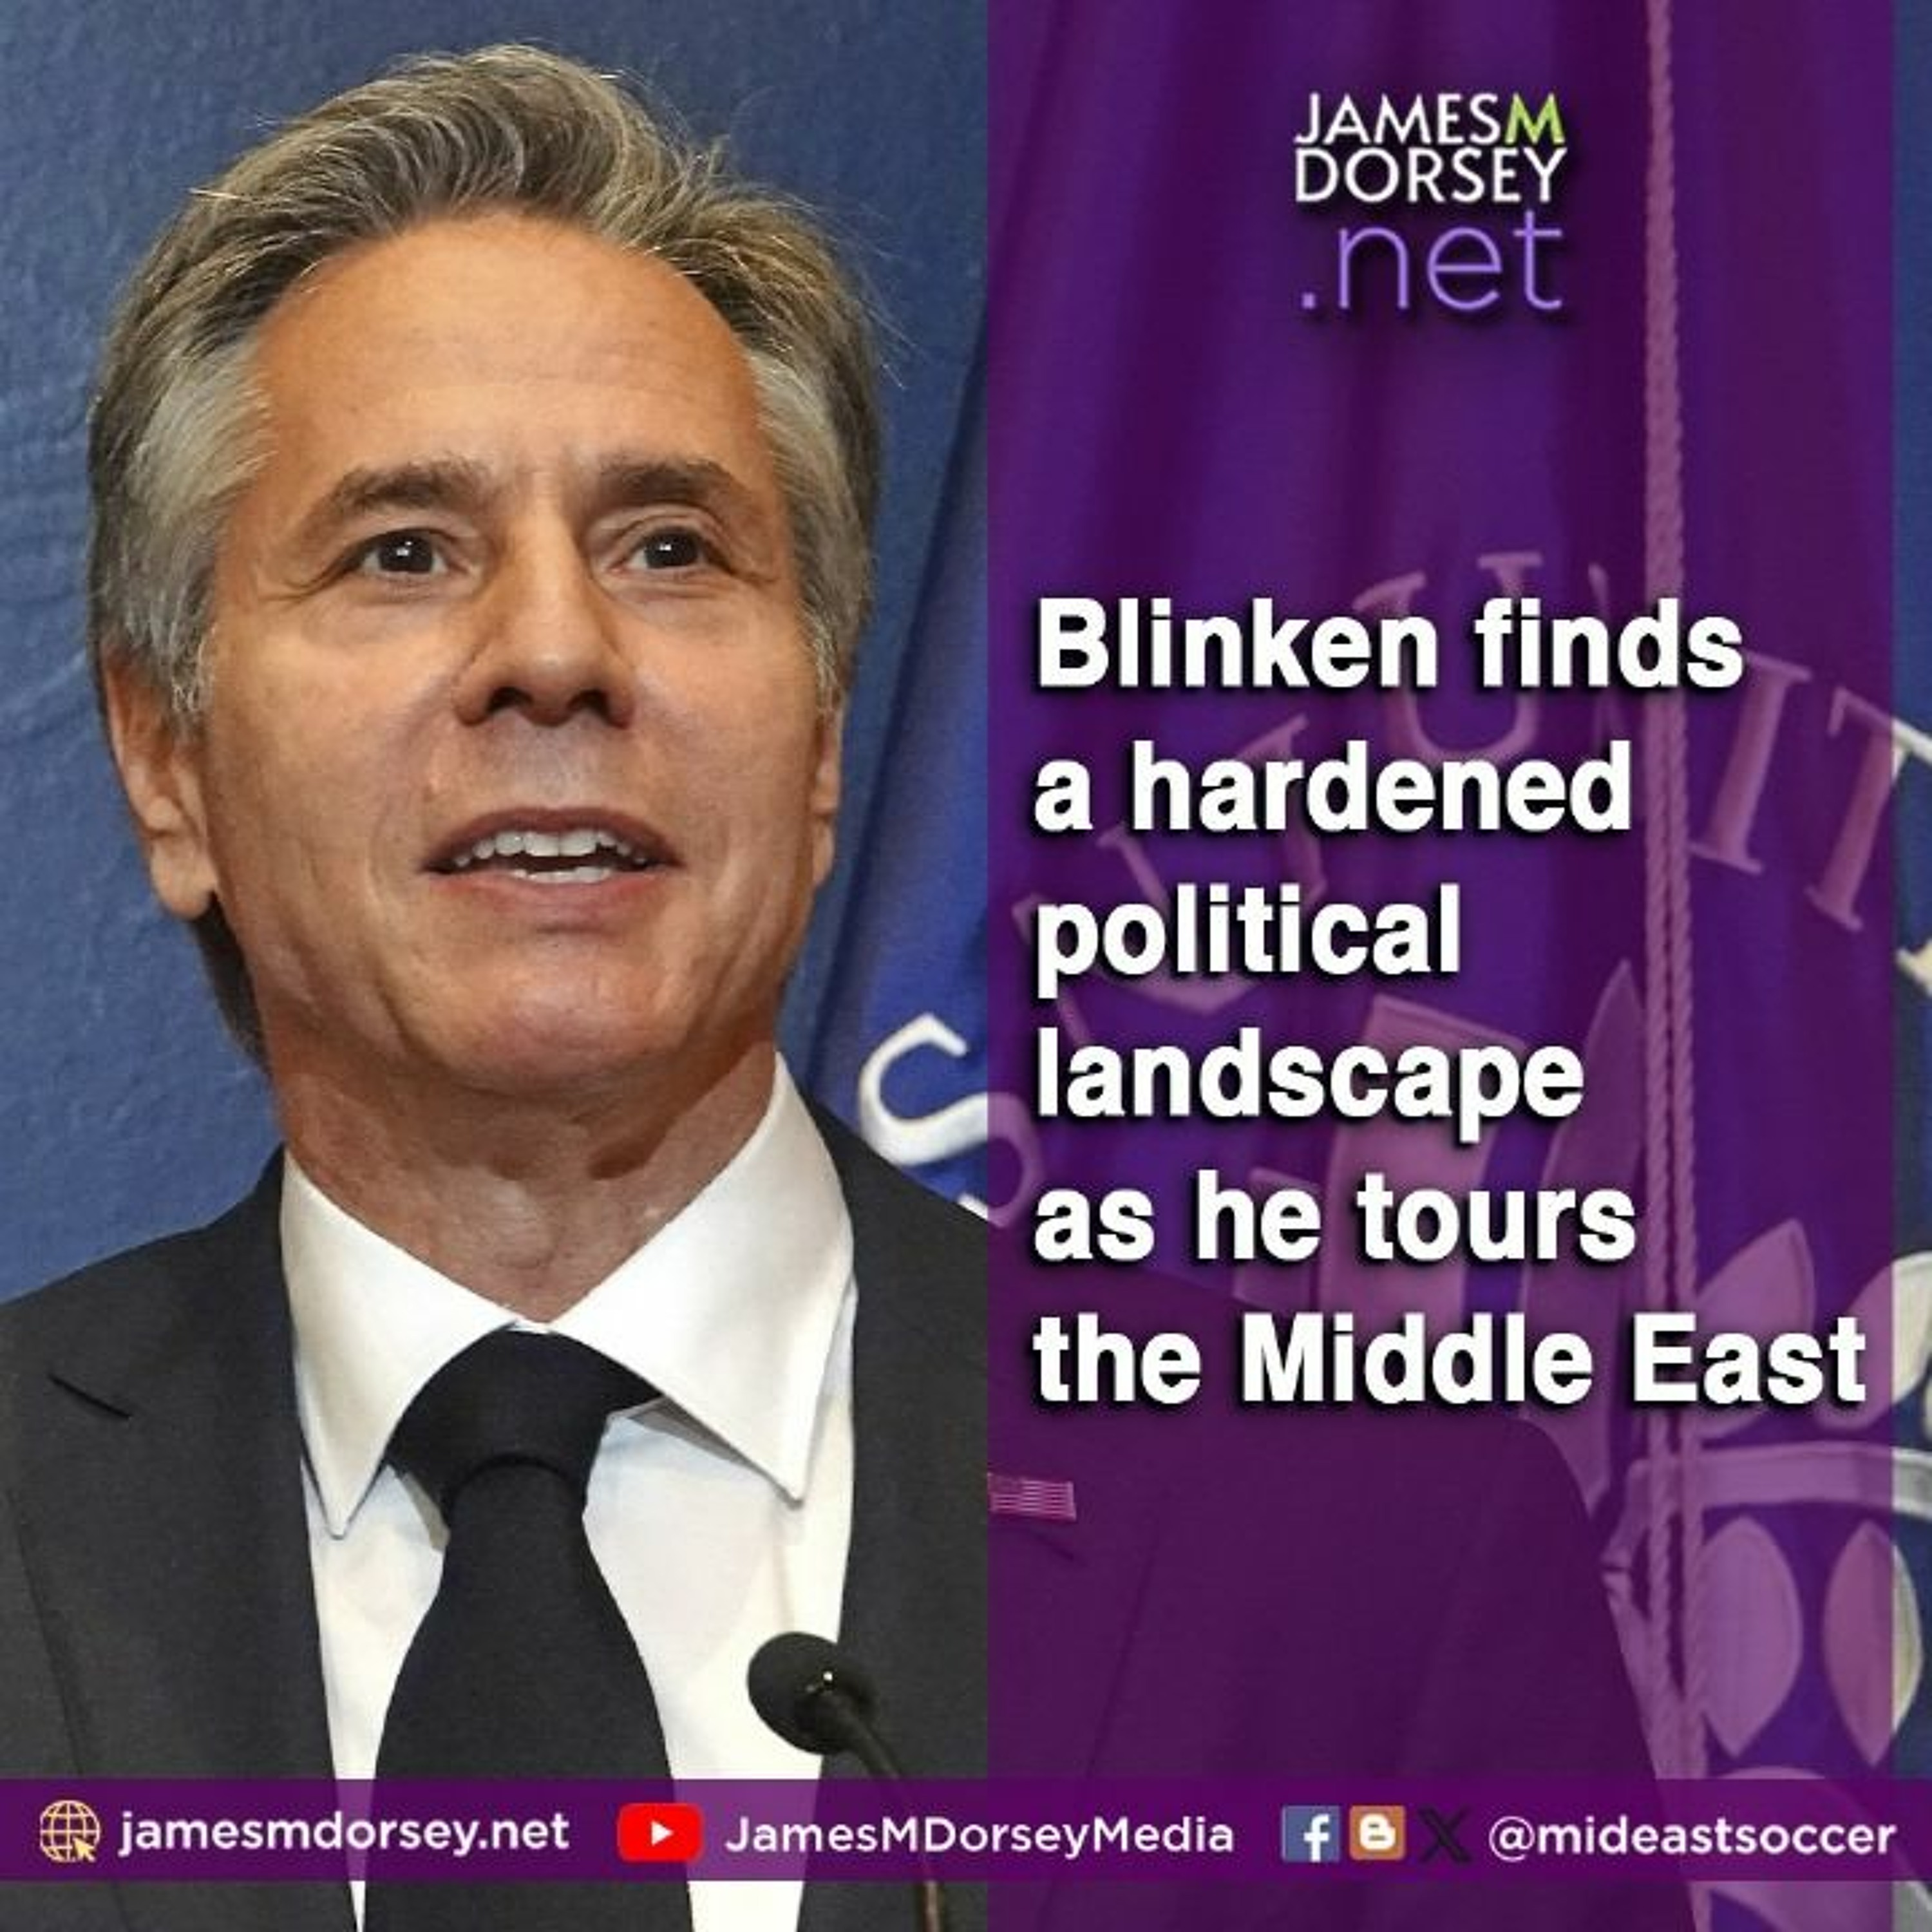 Blinken Finds A Substantially Altered Politics Landscape As He Tours The Middle East